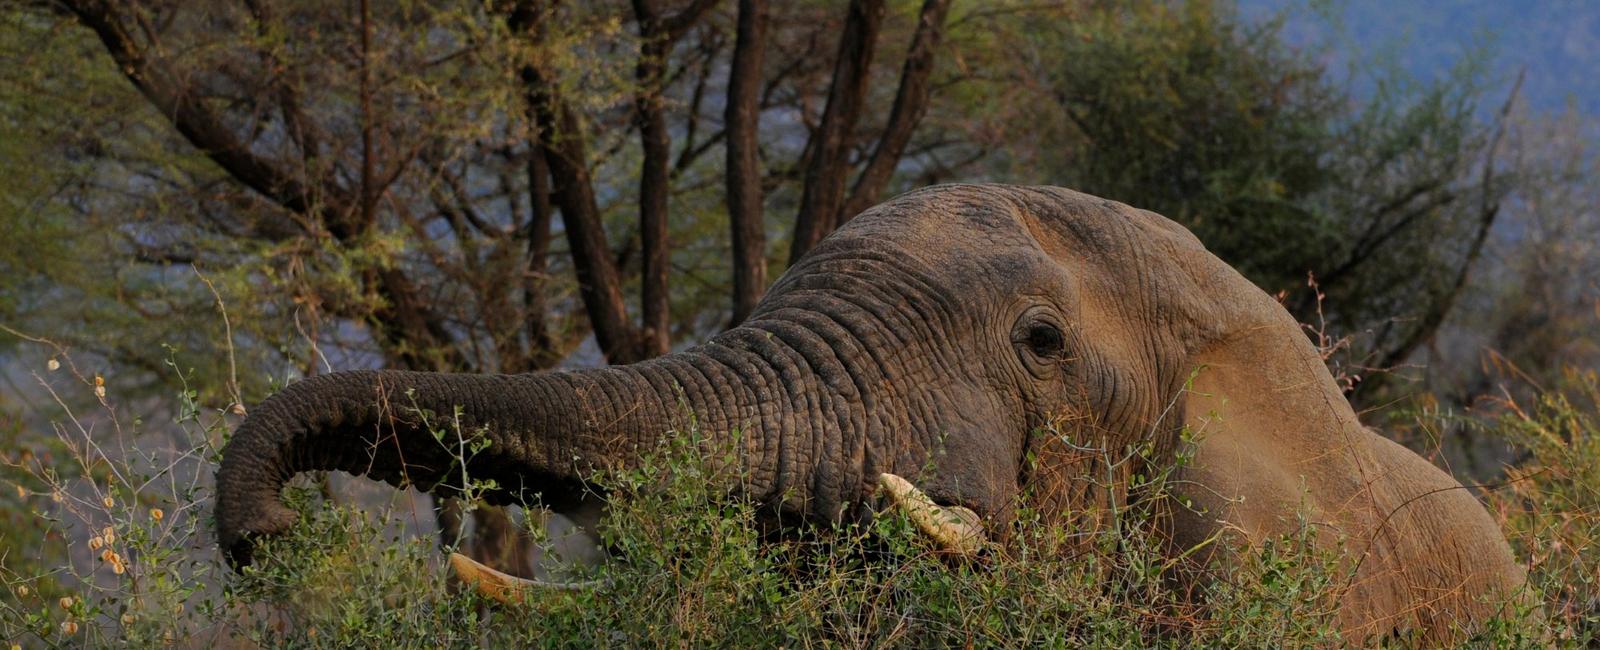 The largest land based mammals on earth are elephants